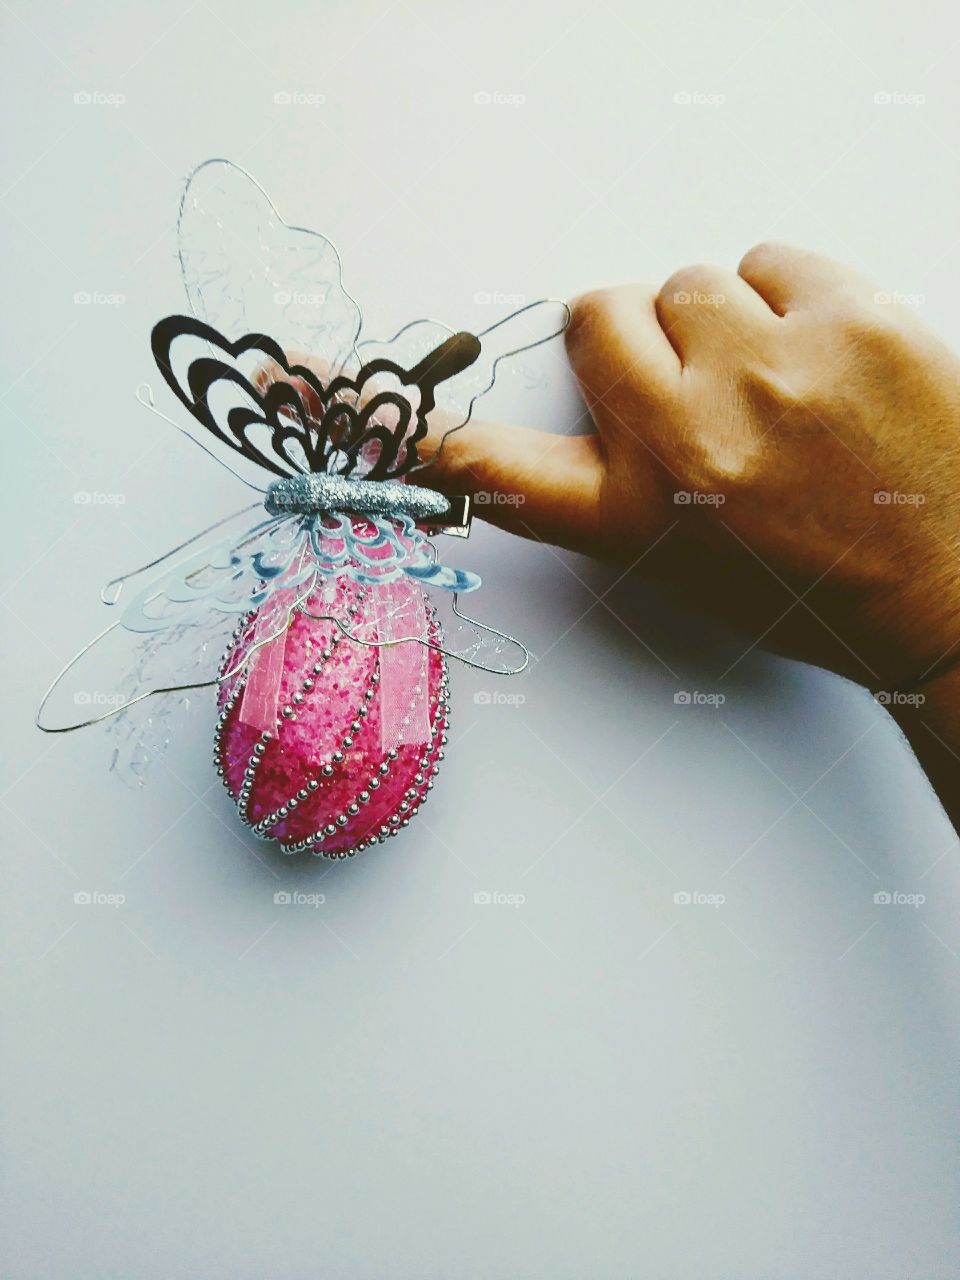 Minimalist photo holding pink decorative egg work a silver butterfly